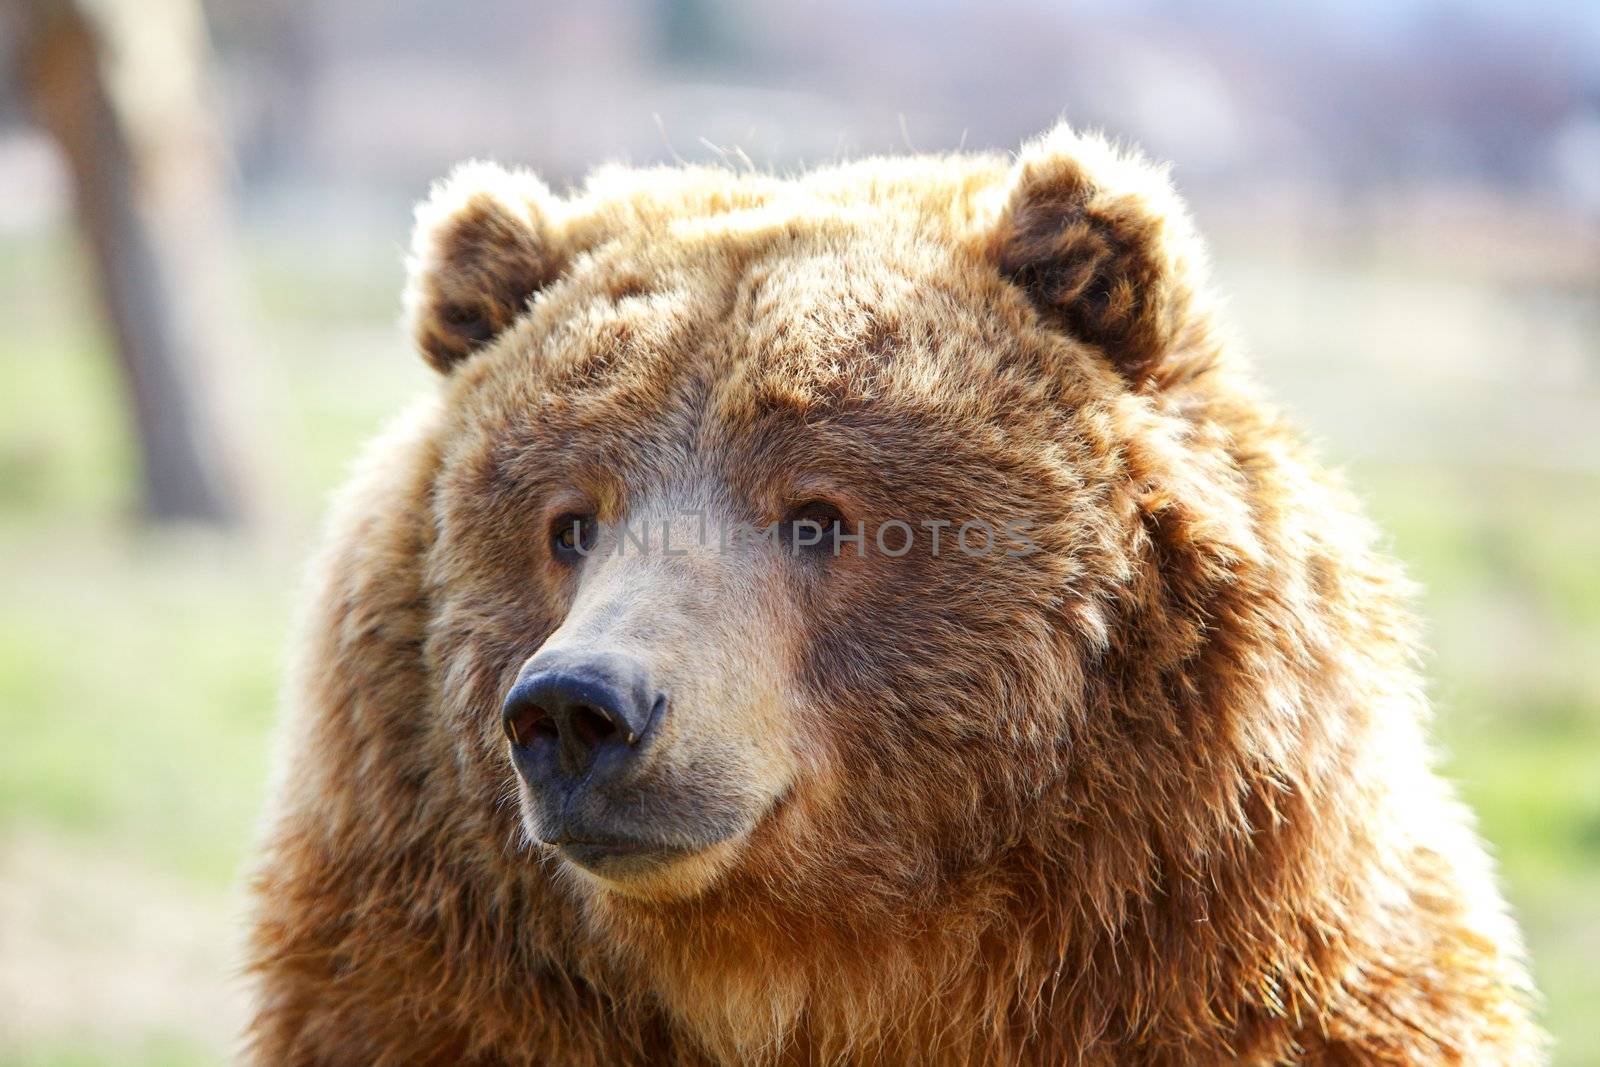 Fuzzy furry head of a seated brown bear